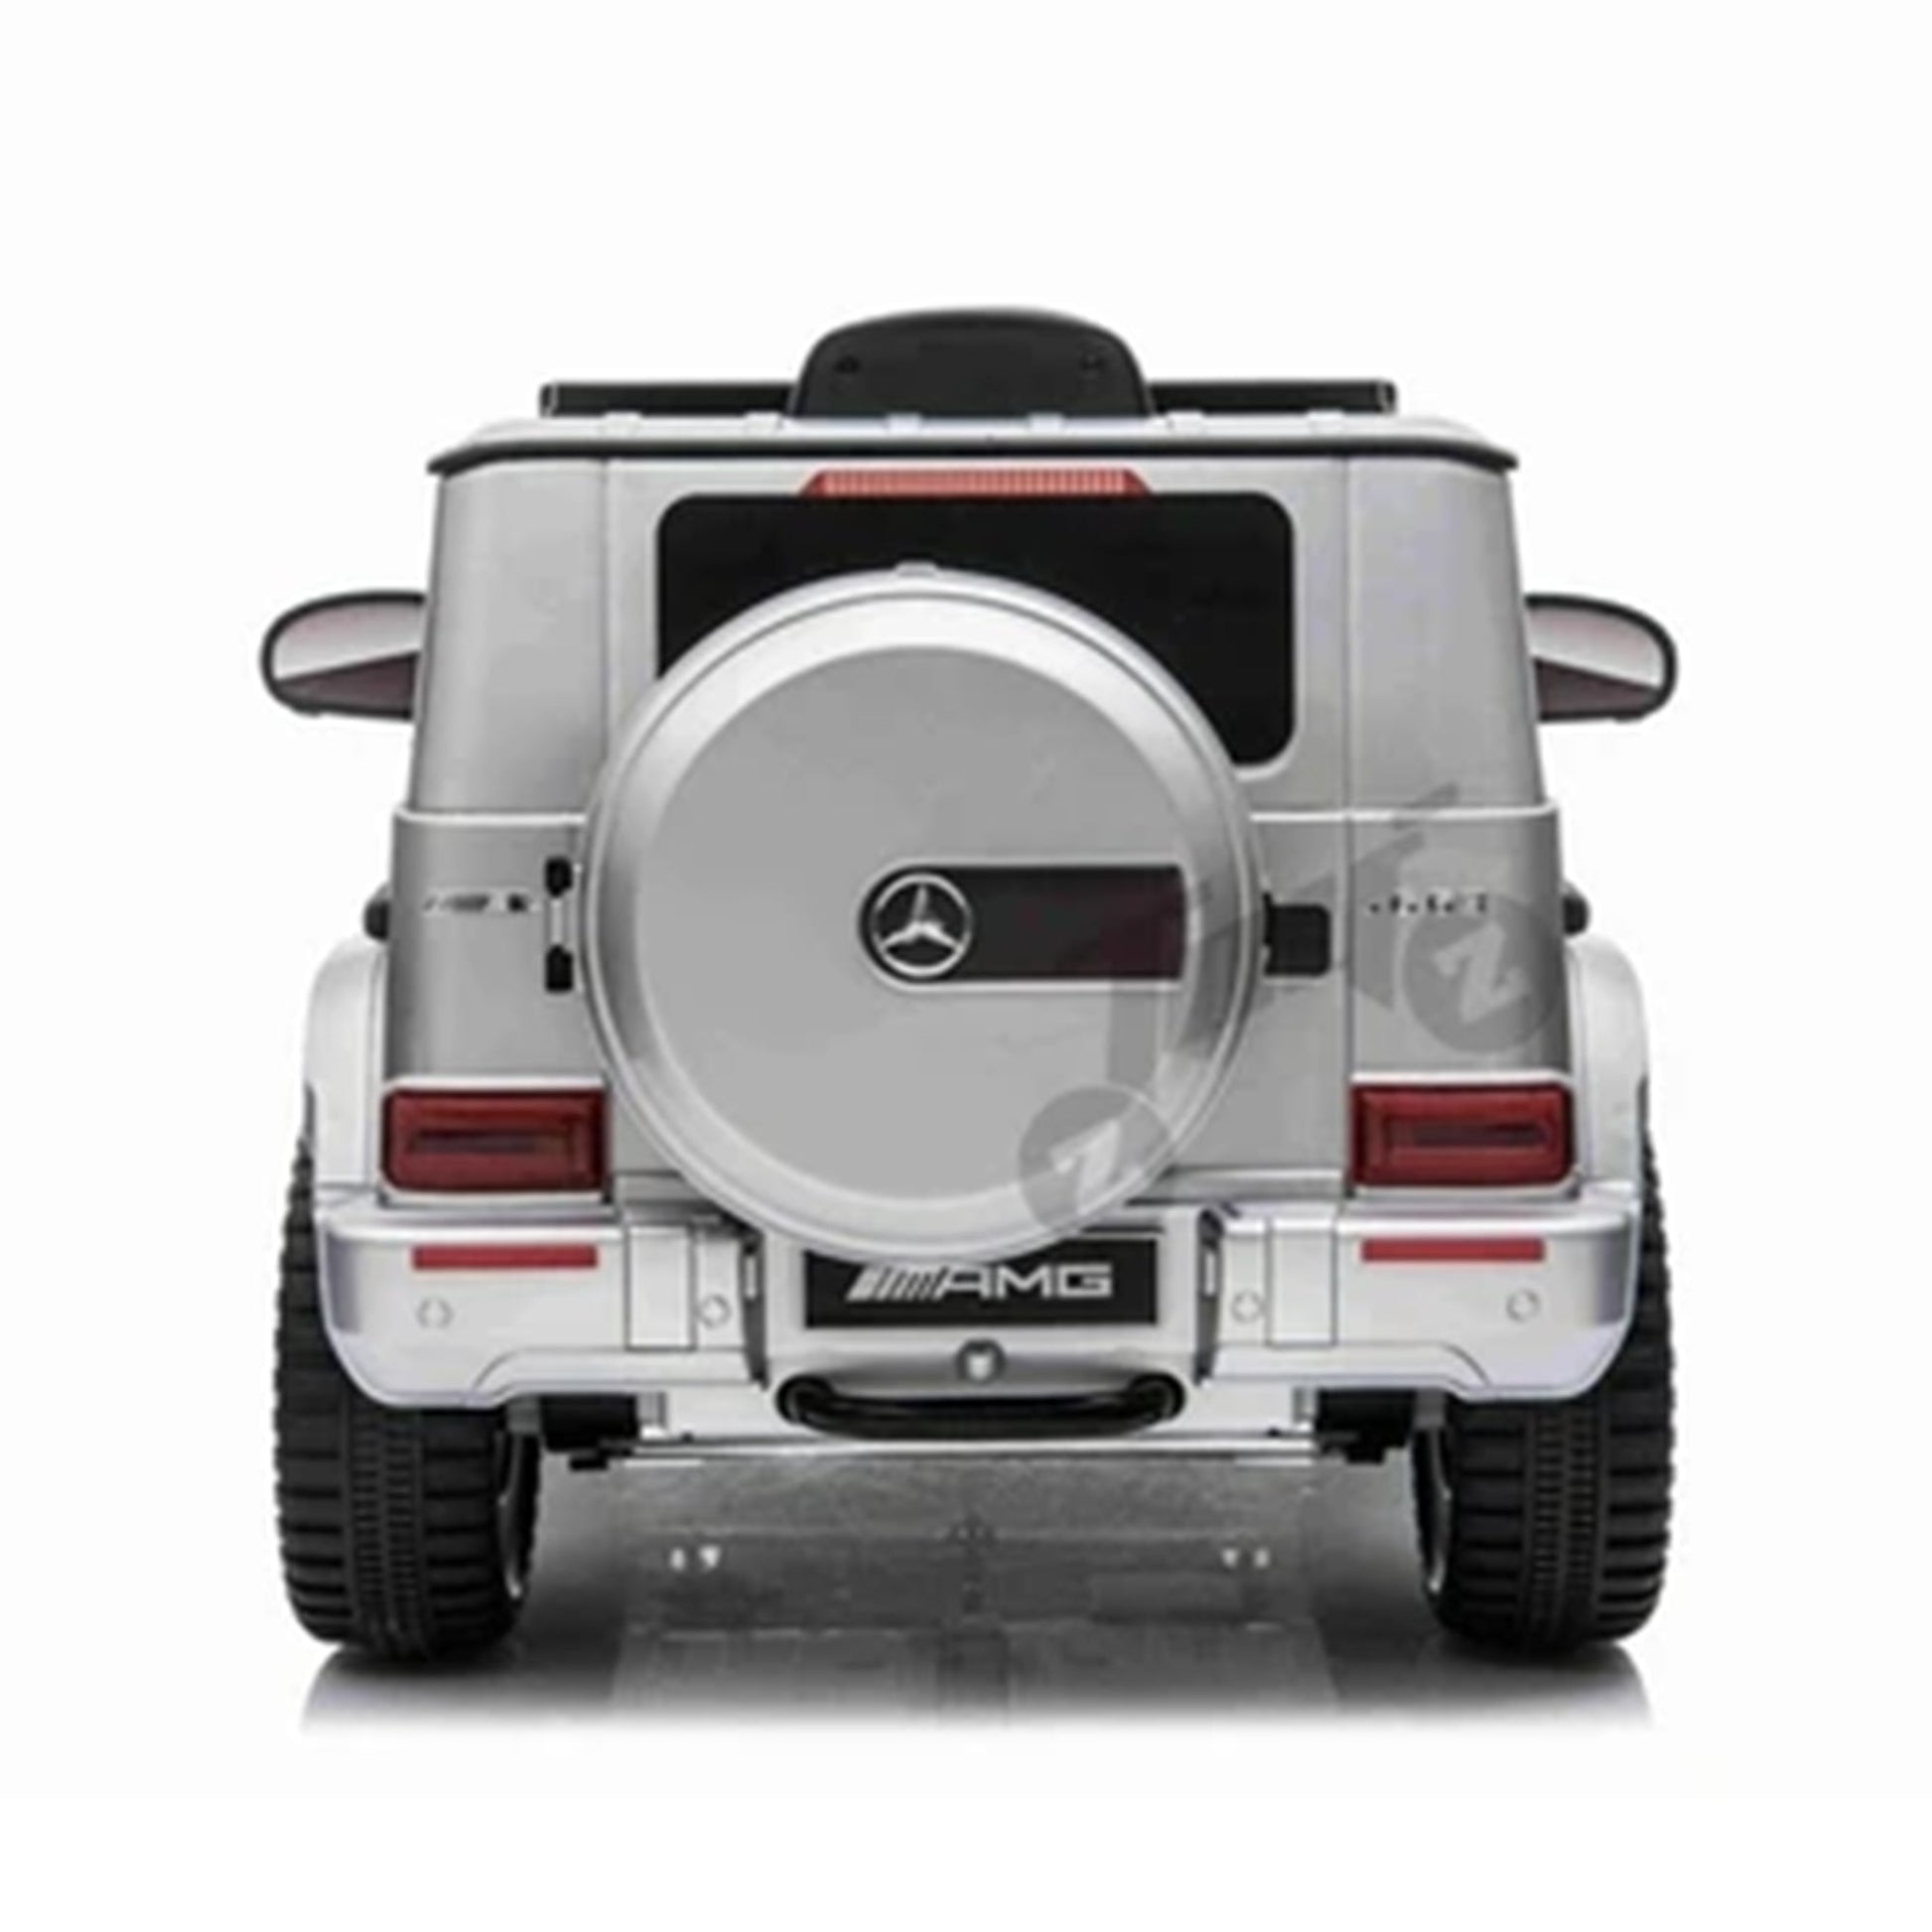 Silver Mercedes-Benz G63 AMG 12V battery electric ride-on car for kids on a white background.